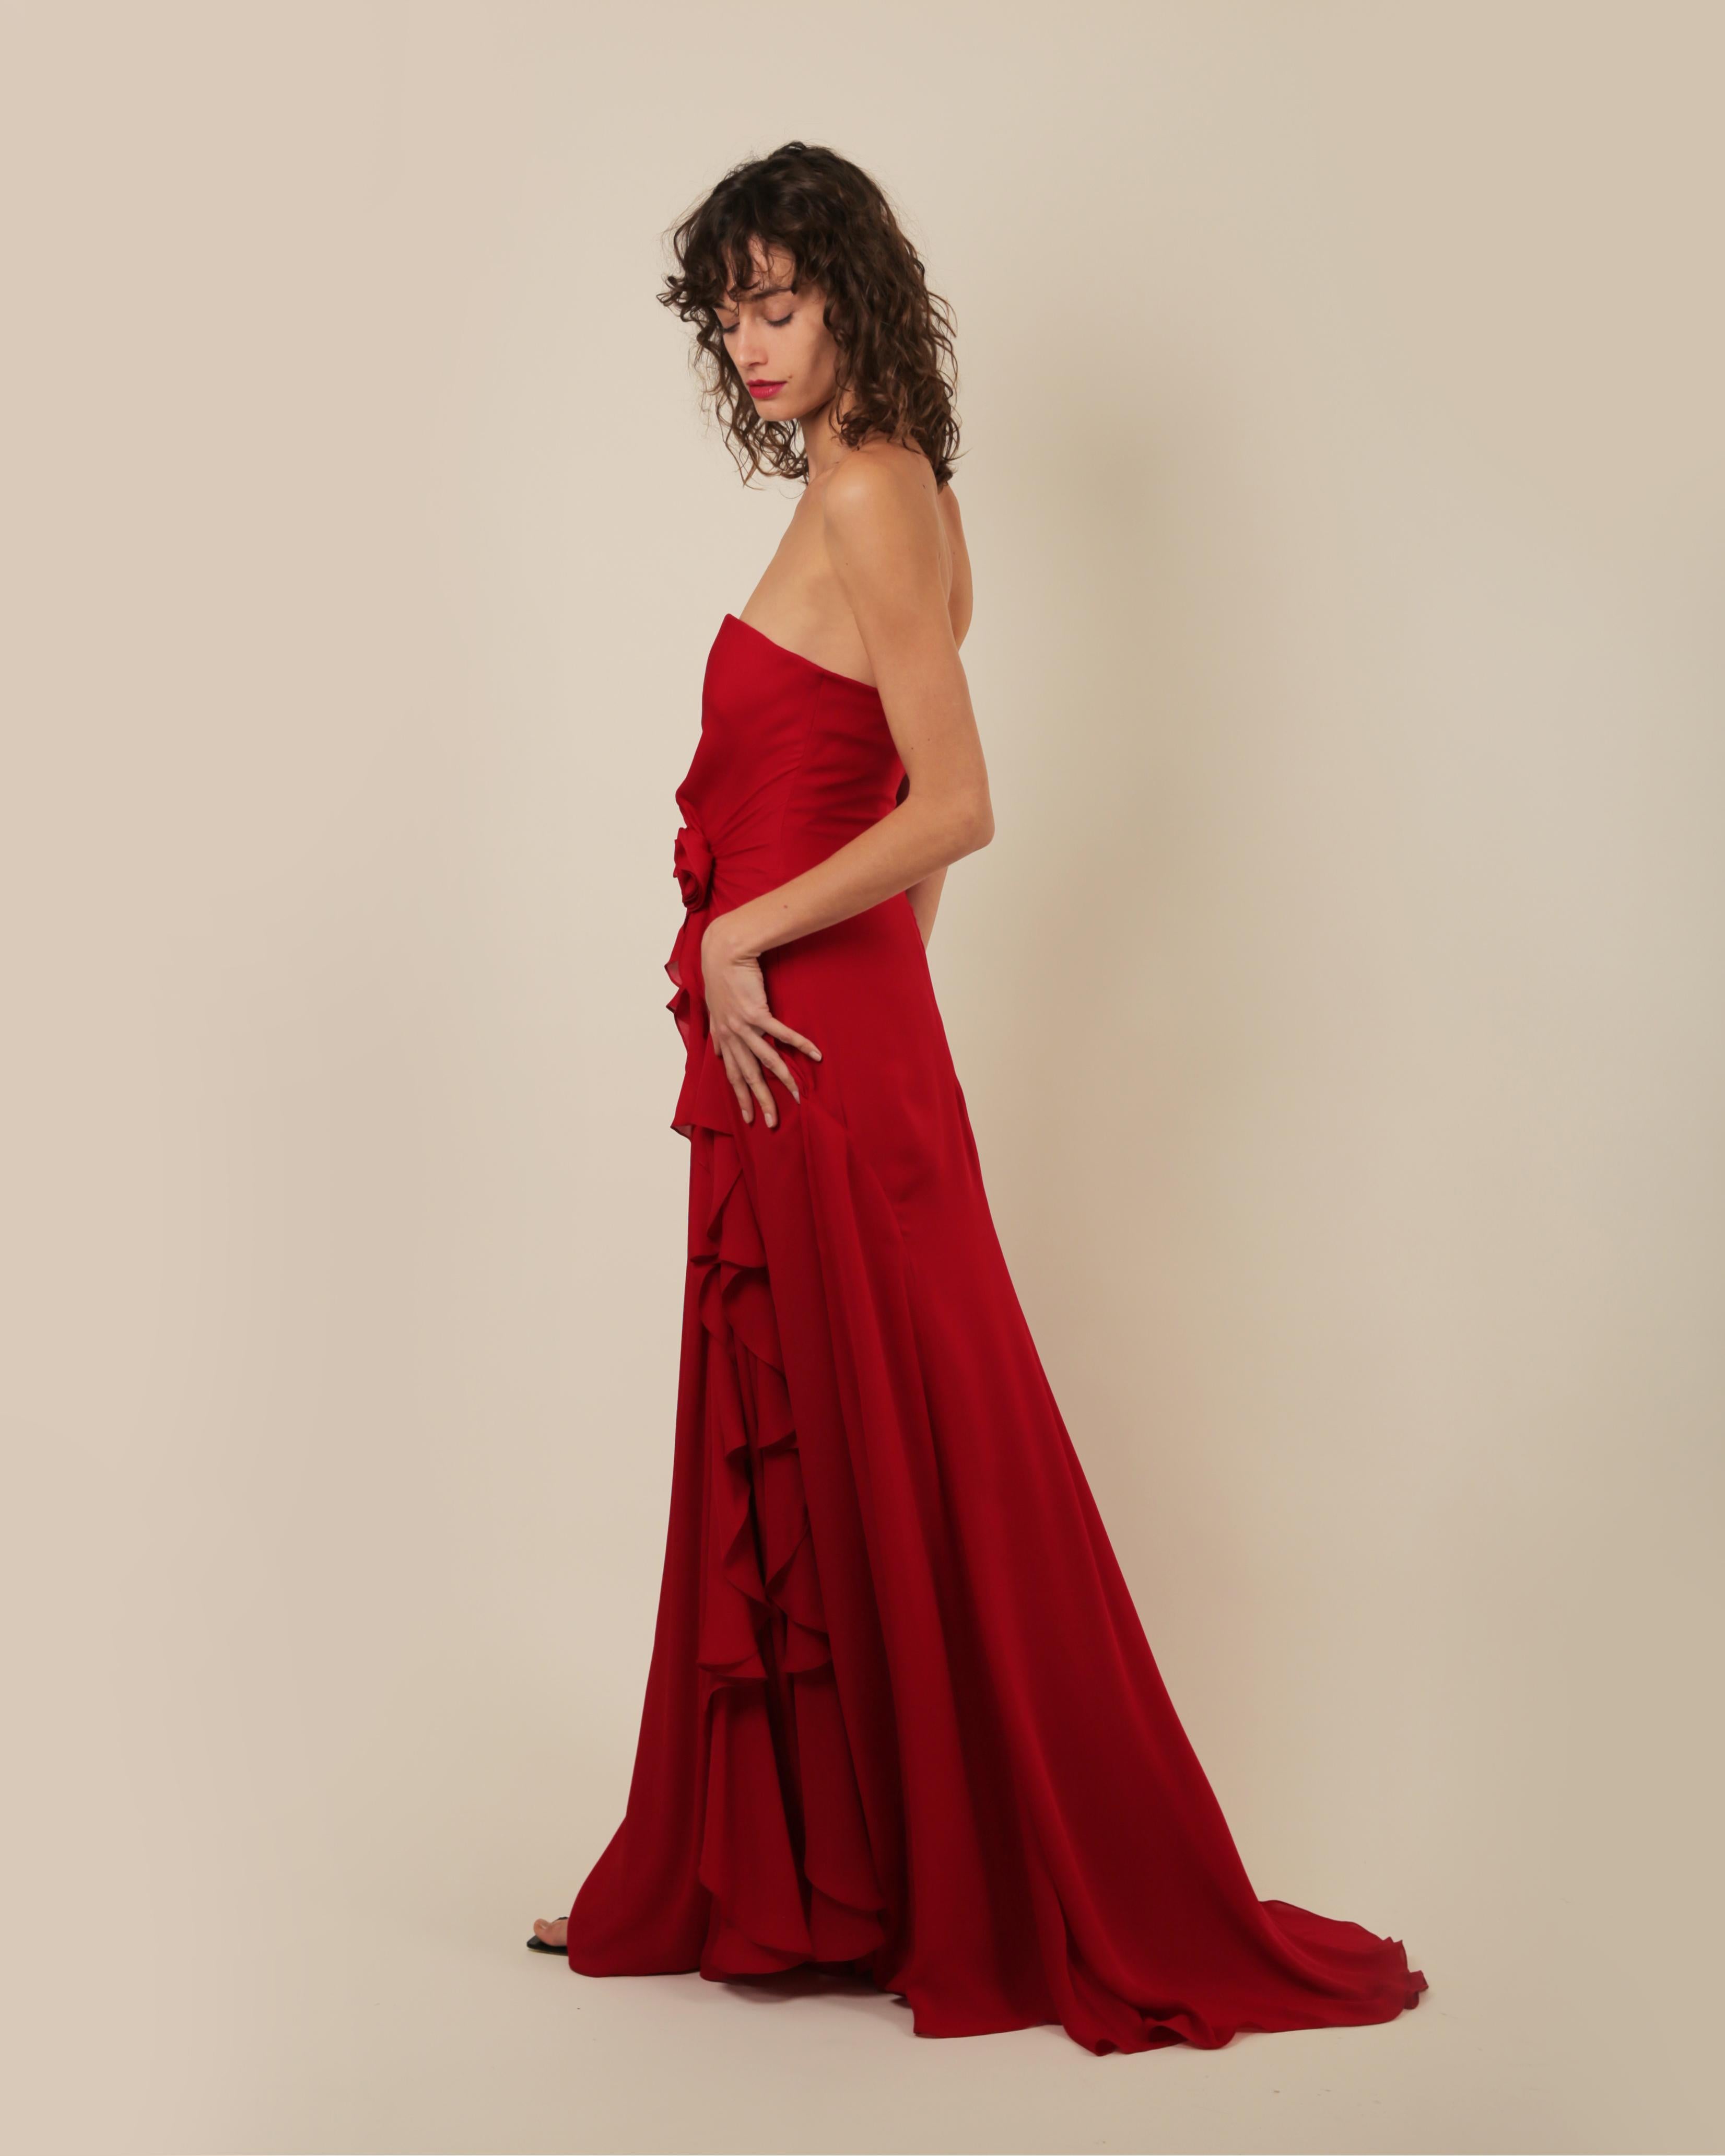 LOVE LALI Vintage

From Ralph Lauren purple label S/S 2013 runway collection that was inspired by Spain/Latin American 
A gorgeous sweeping ruby red evening gown with a strapless sweetheart neckline in silk georgette 
The bodice of the dress is